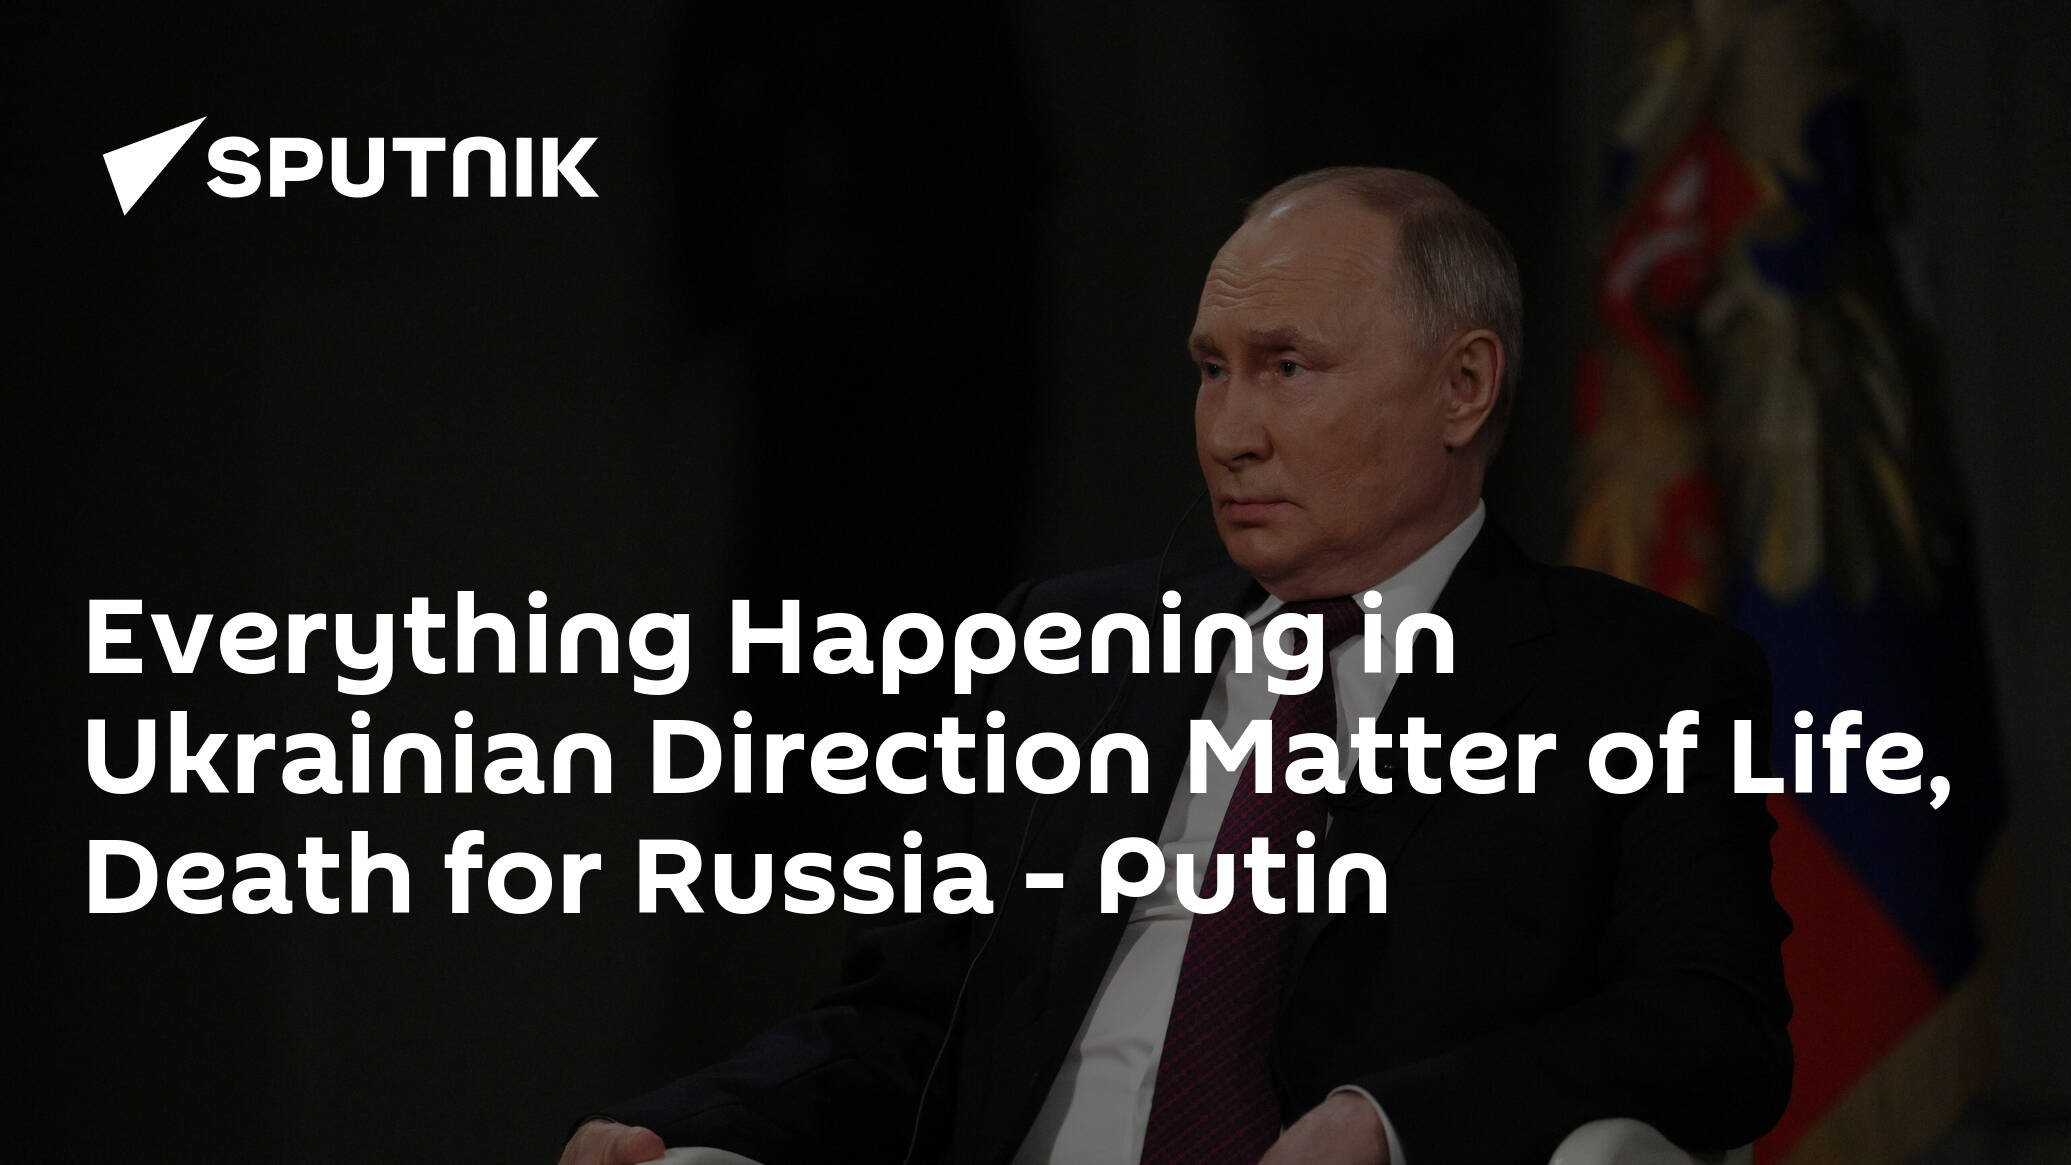 Everything Happening in Ukrainian Direction Matter of Life, Death for Russia - Putin